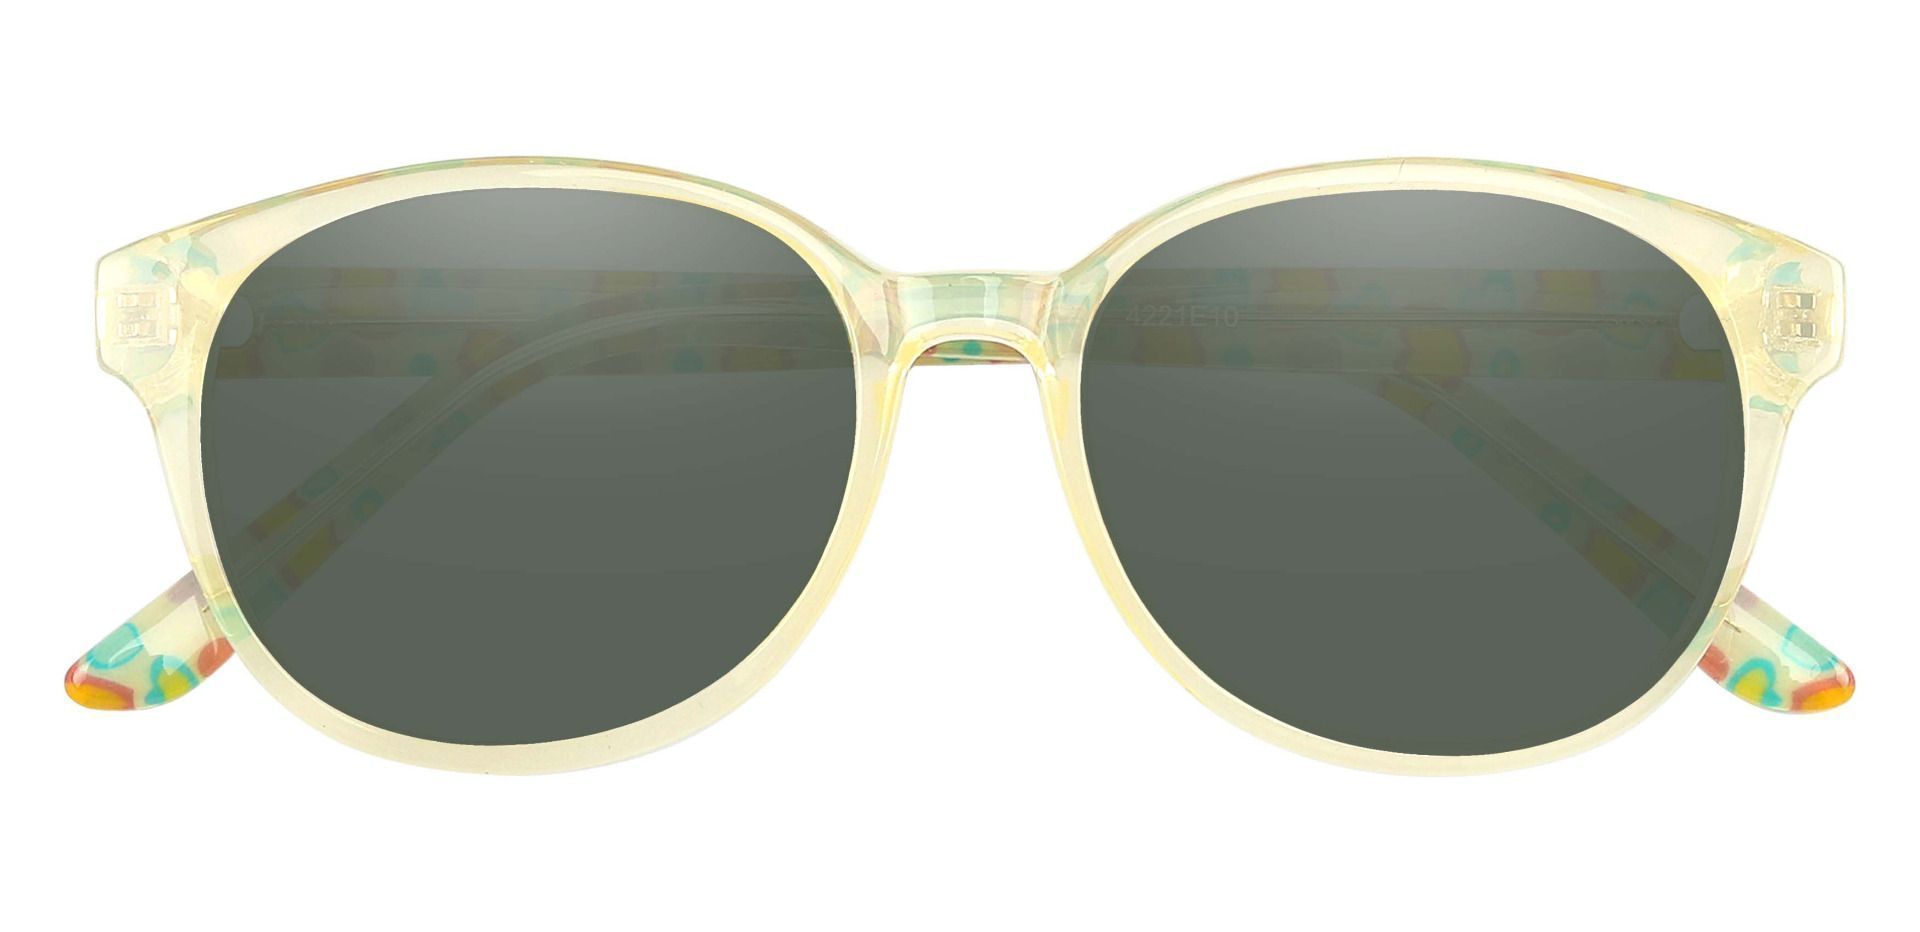 Allegra Oval Lined Bifocal Sunglasses - Green Frame With Green Lenses